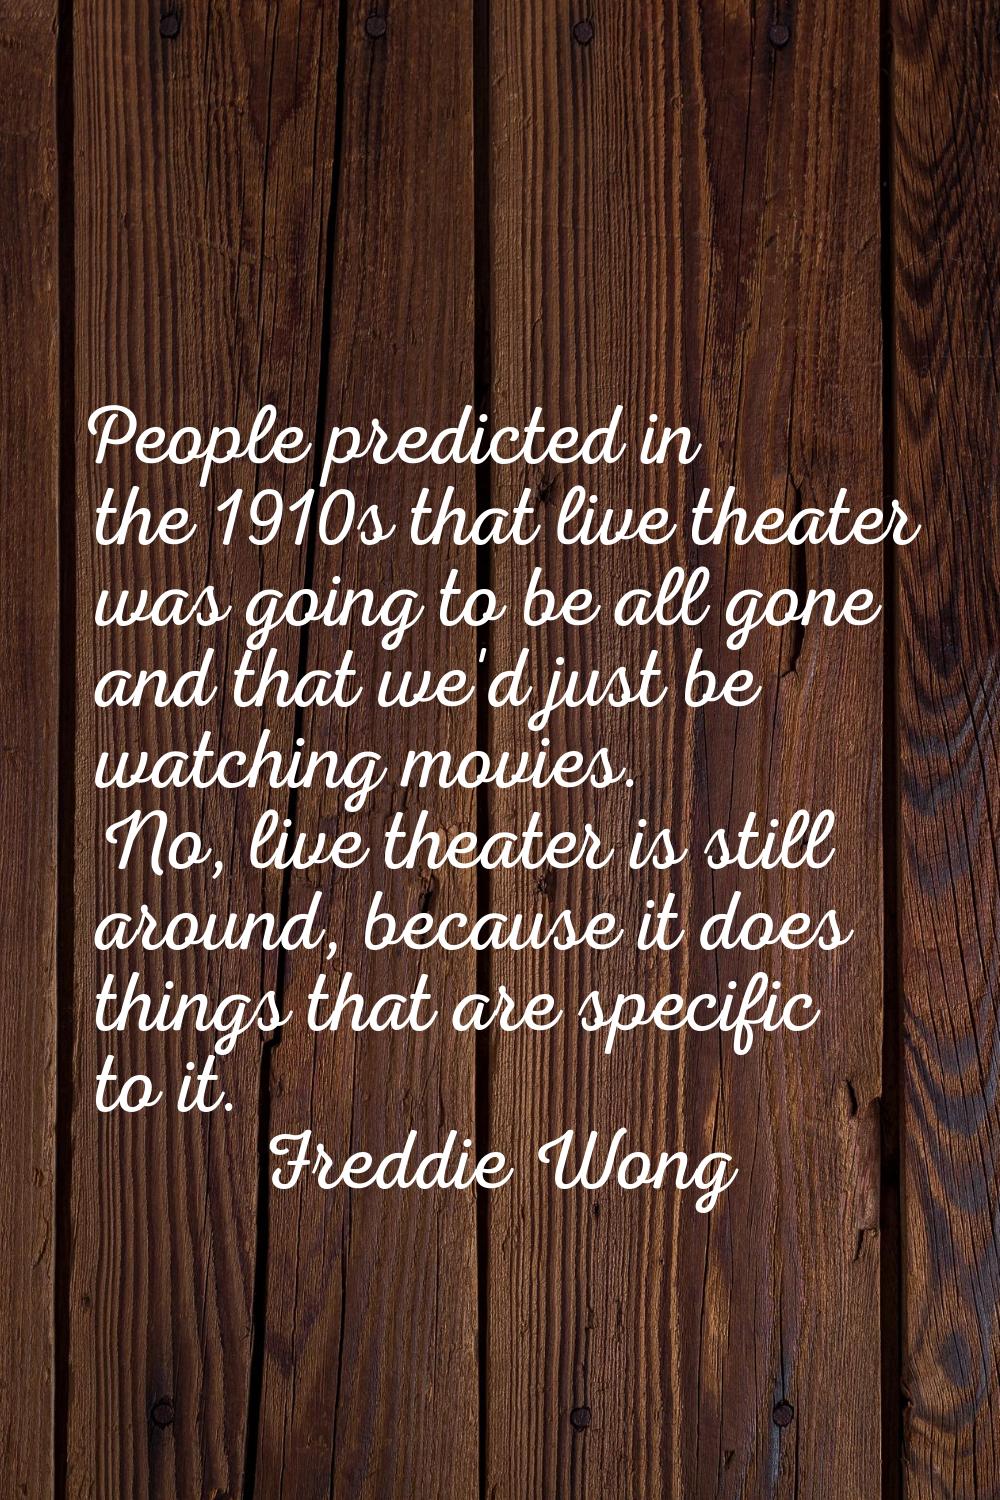 People predicted in the 1910s that live theater was going to be all gone and that we'd just be watc